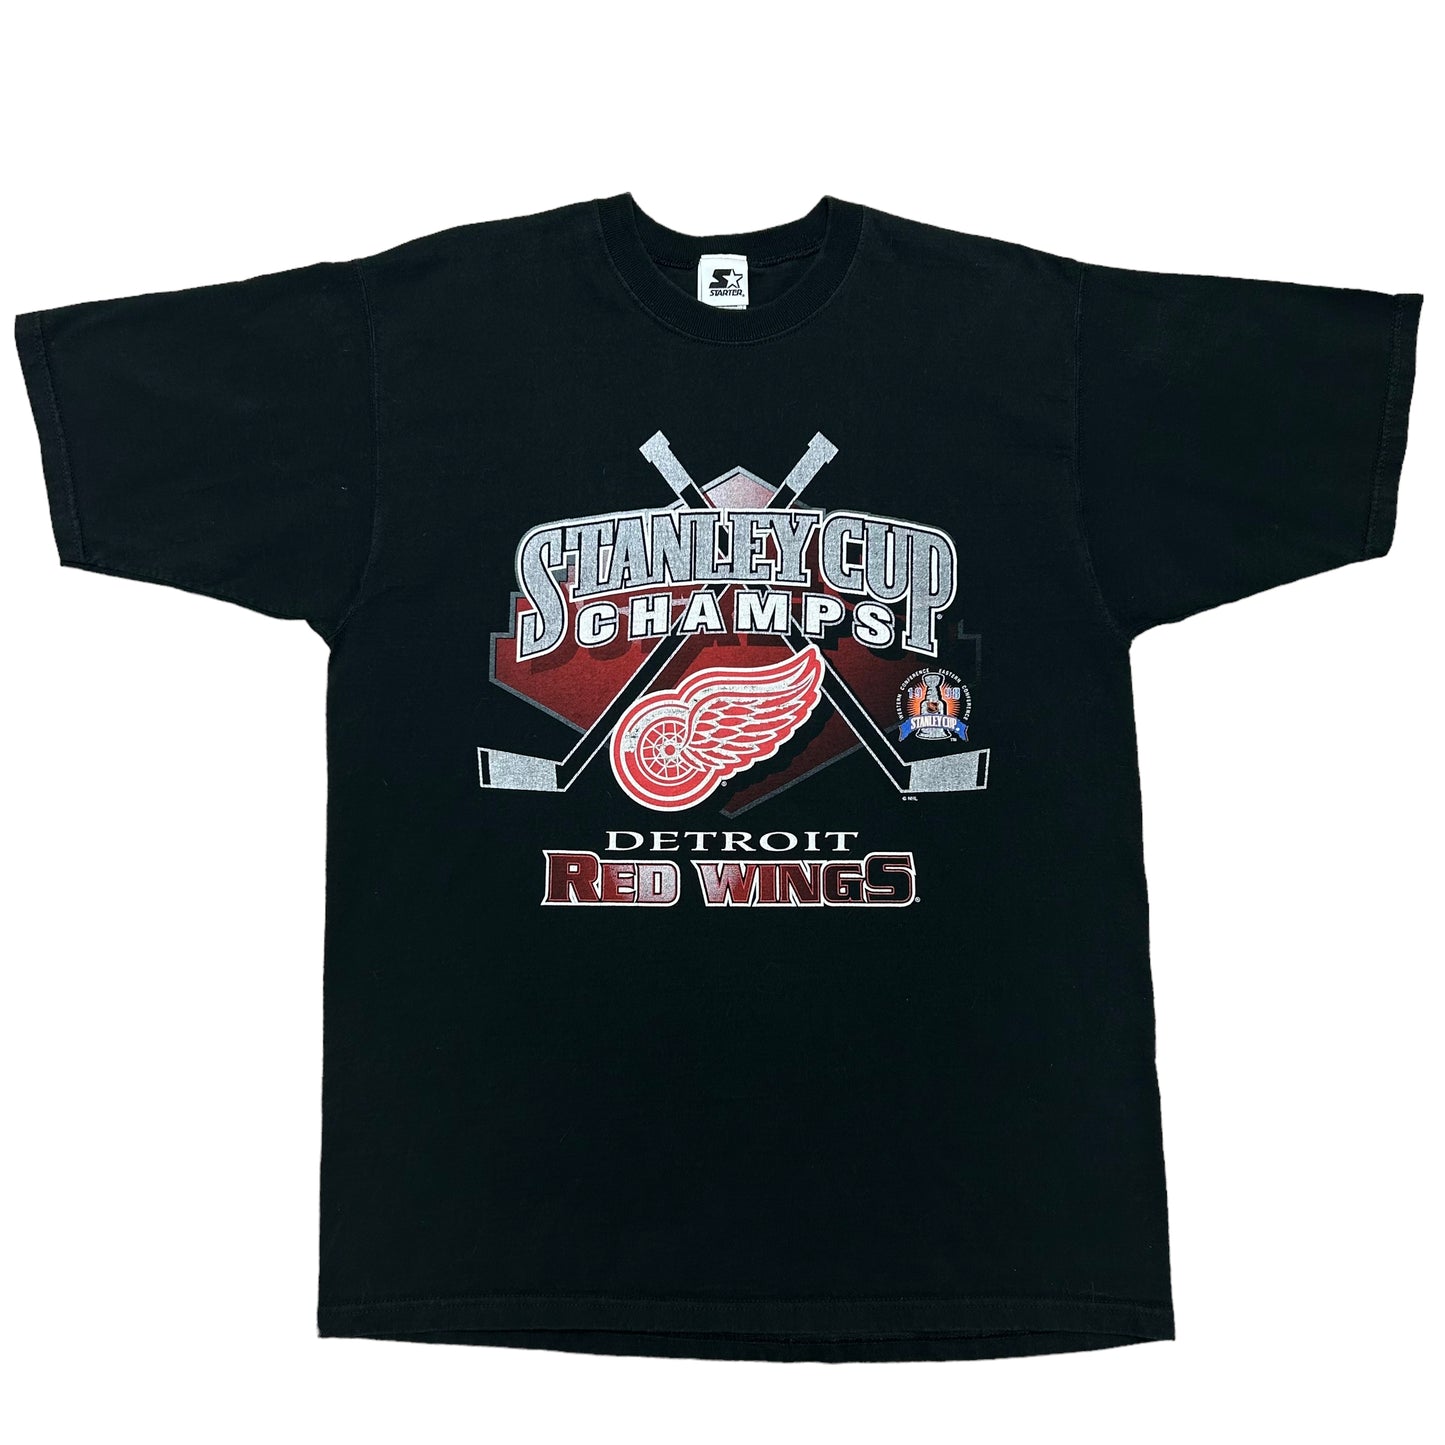 Vintage 1990s Detroit Red Wings ‘98 Stanley Cup Champions Black Graphic T-Shirt - Size Large